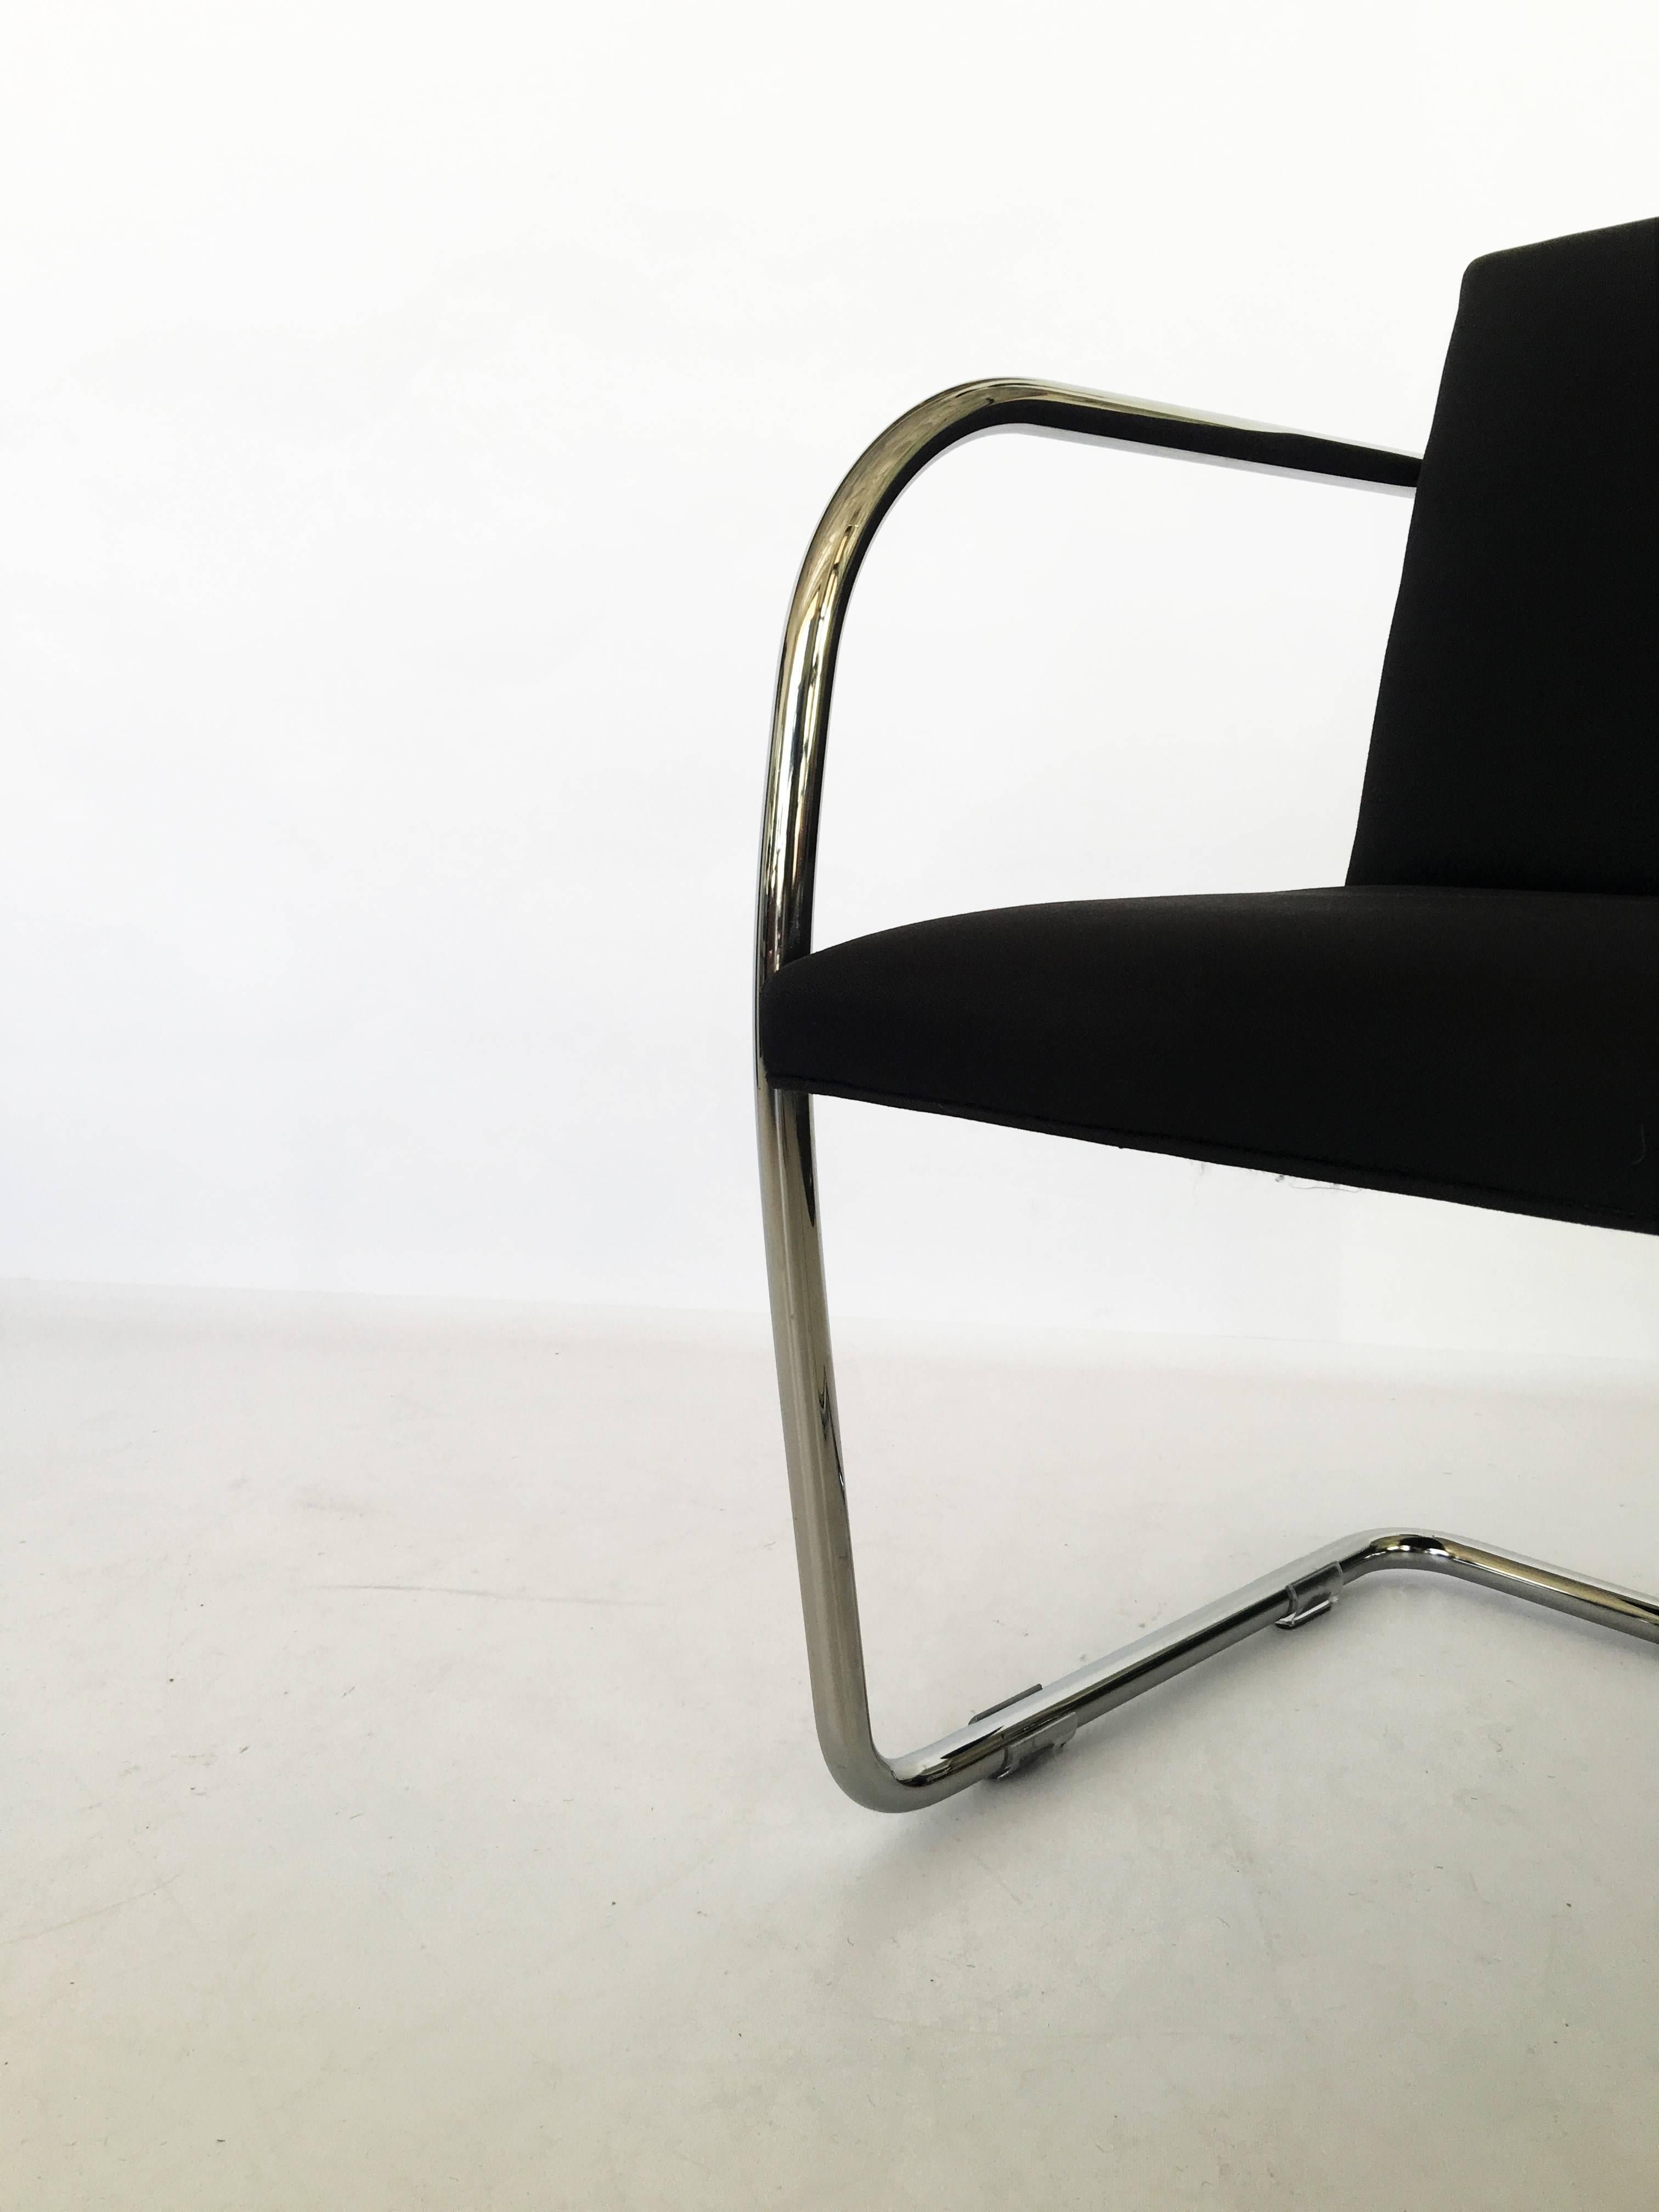 Upholstery Pair of Thonet Mies van der Rohe Brno Chairs For Sale